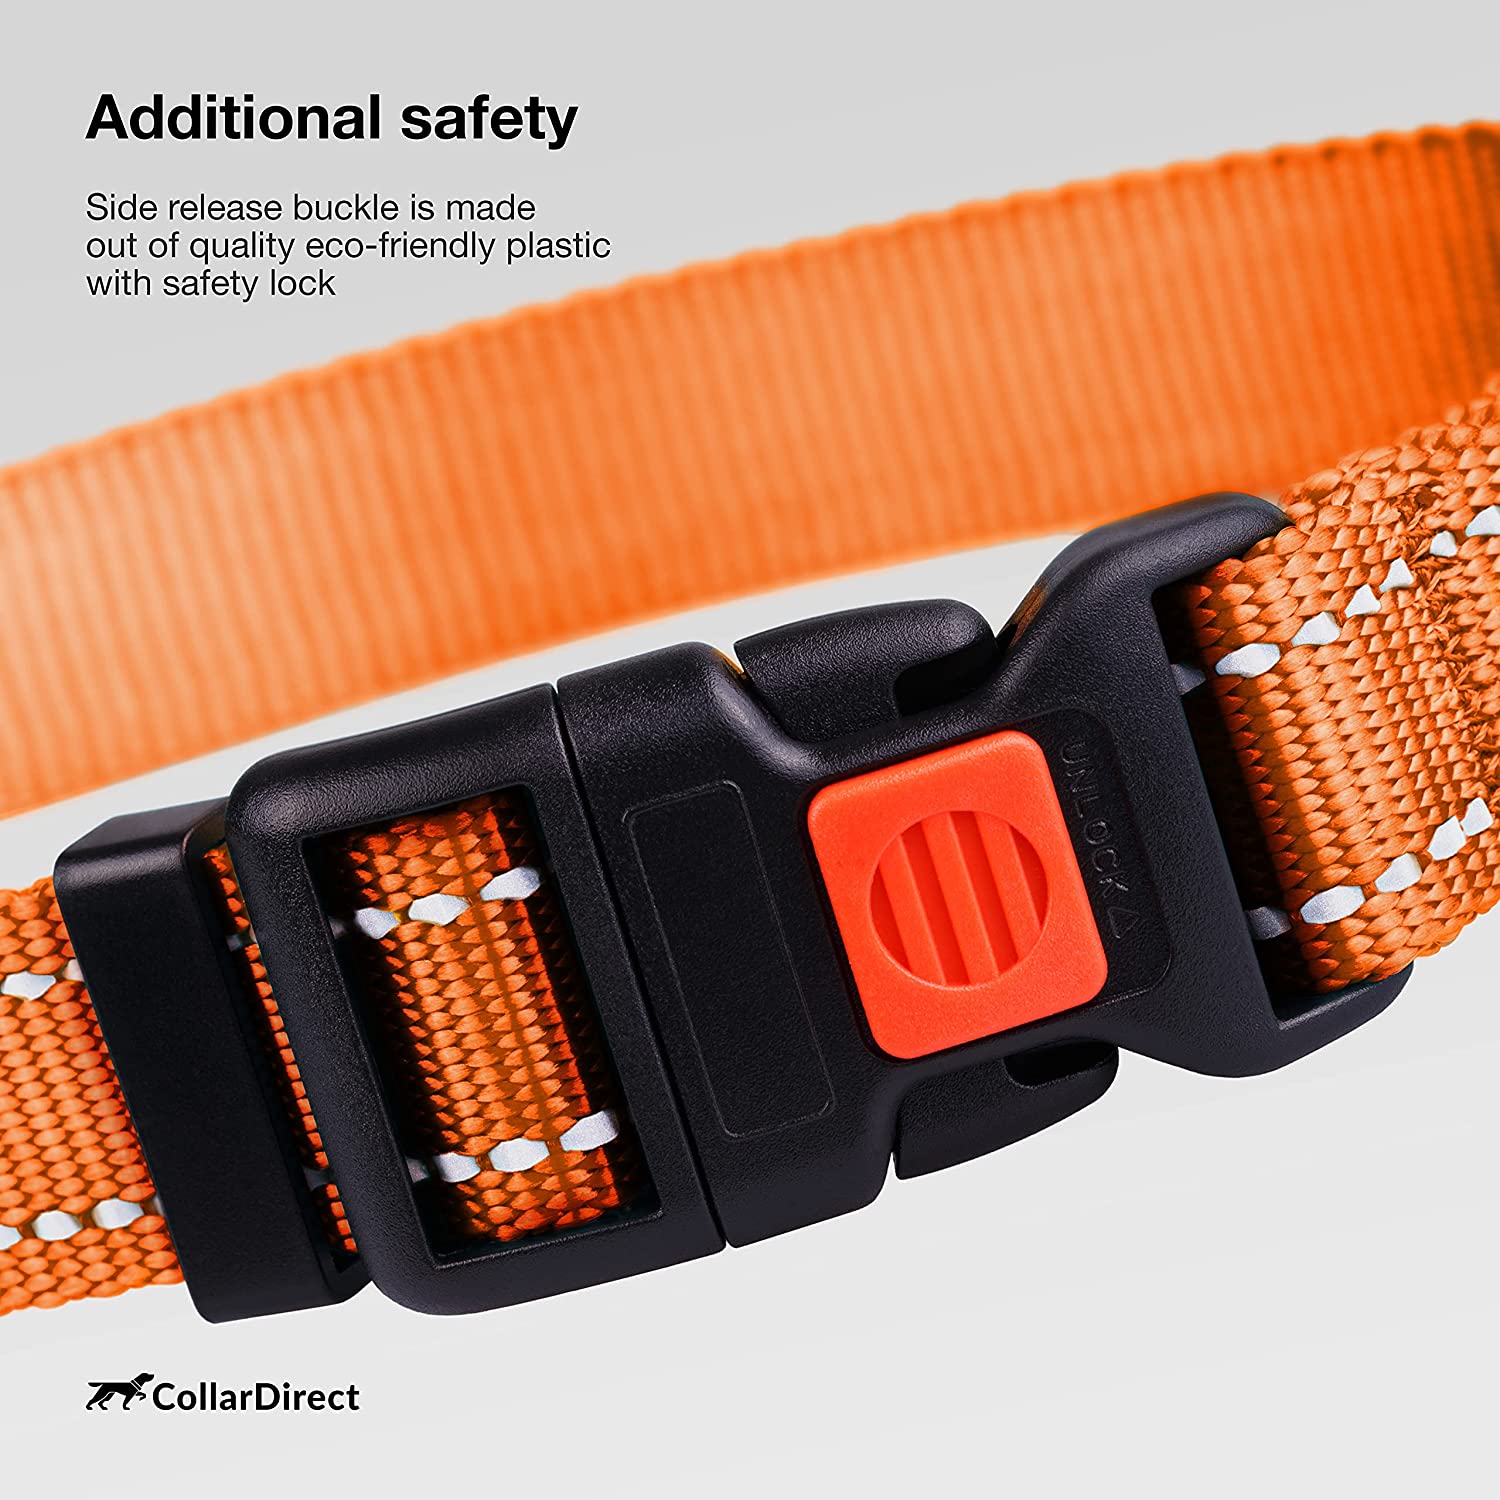 CollarDirect Reflective Dog Collar Safety Nylon Collars for X Large Dogs with Buckle, Orange - image 2 of 7